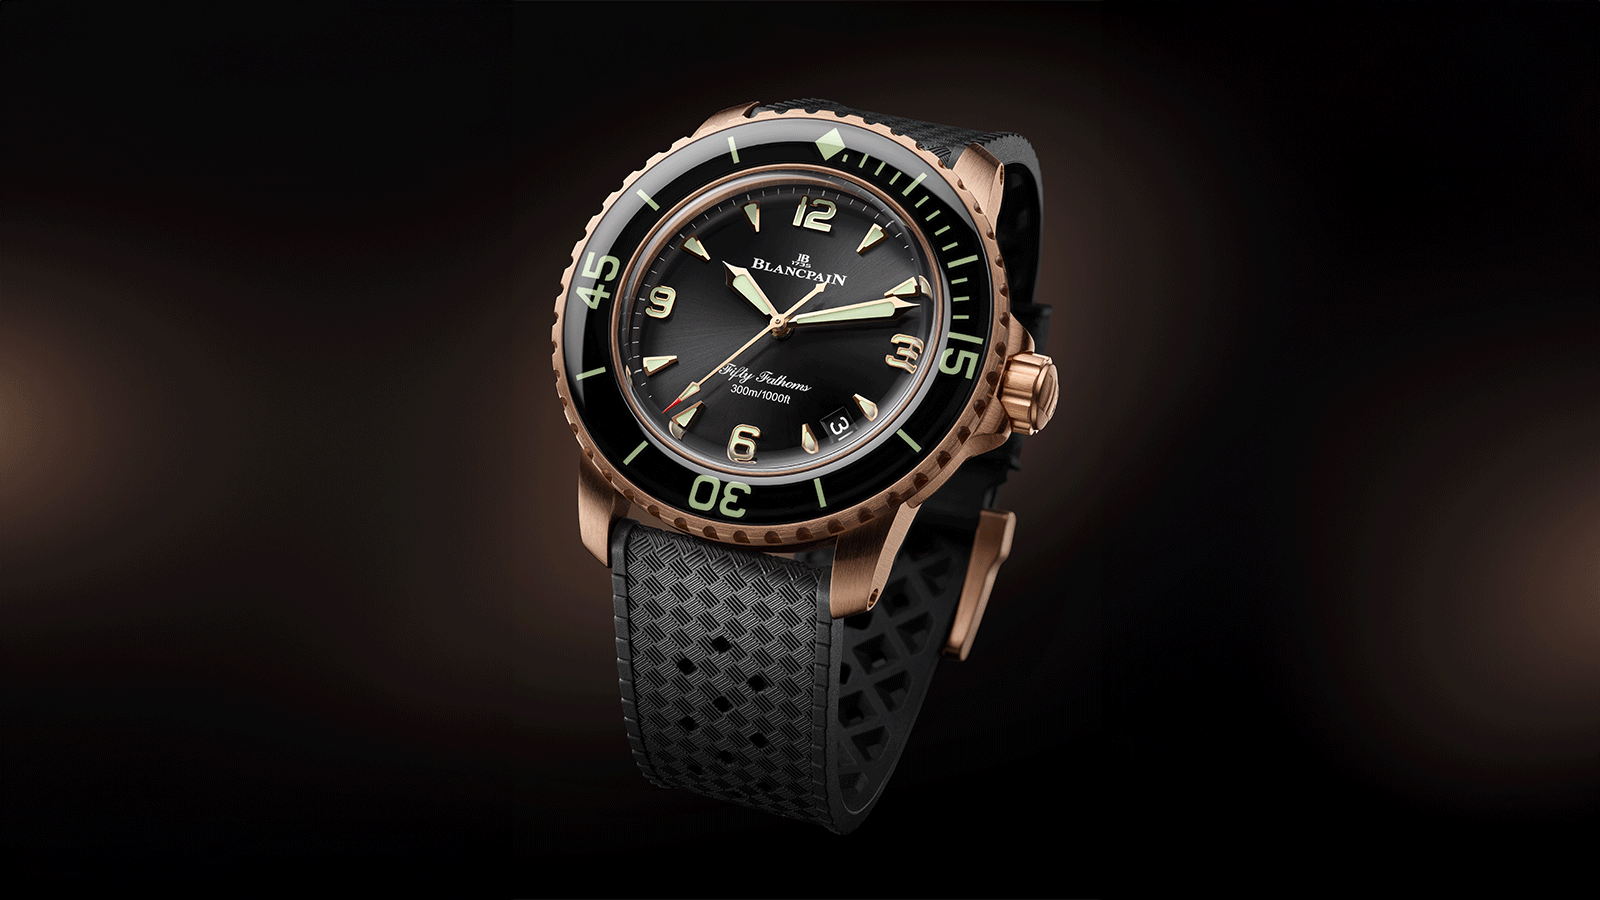 The New Blancpain Fifty-Fathoms in Red Gold.